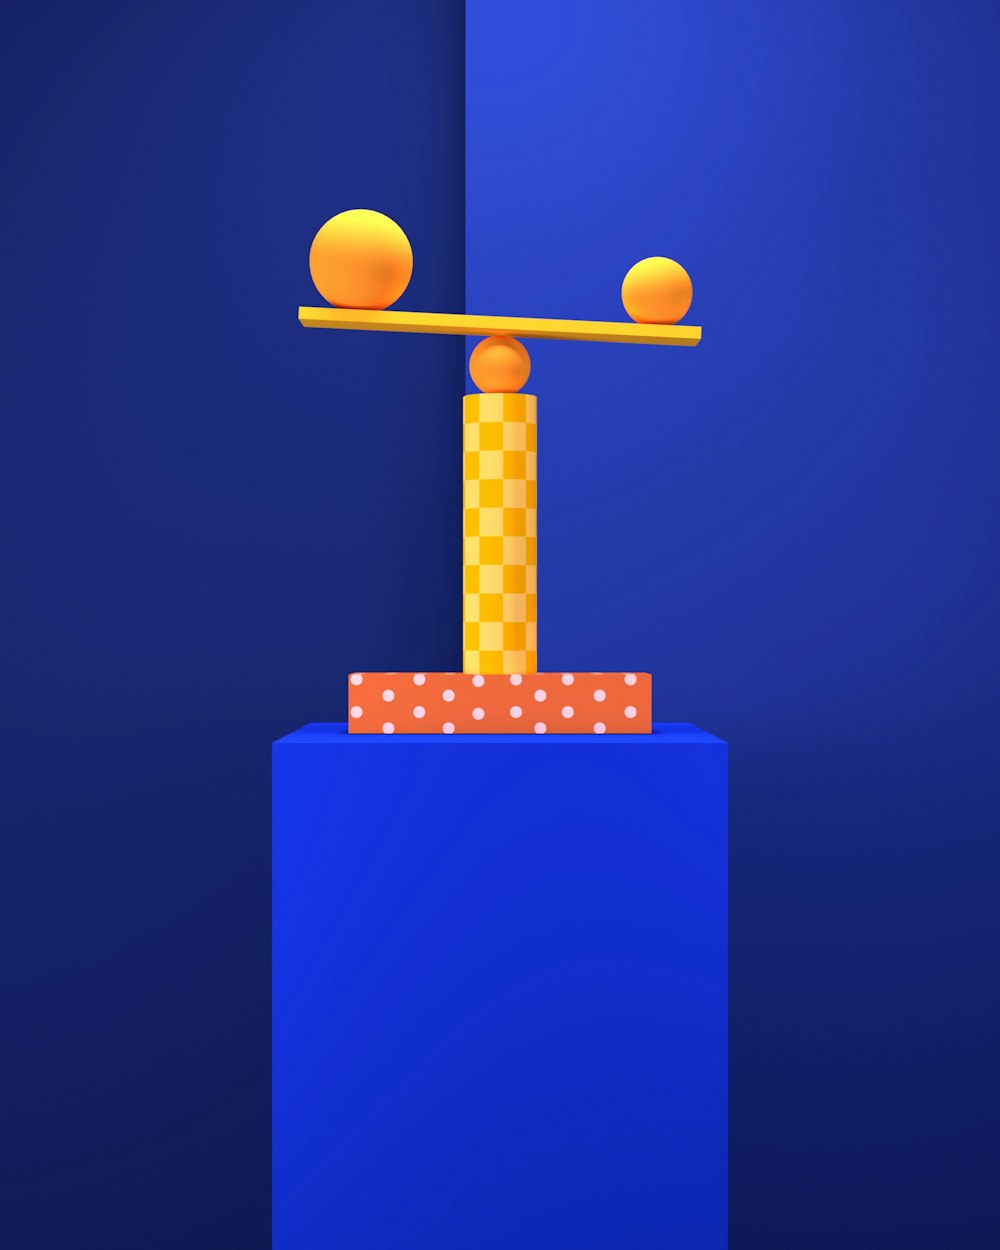 a computer generated image of a balance beam with balls on it